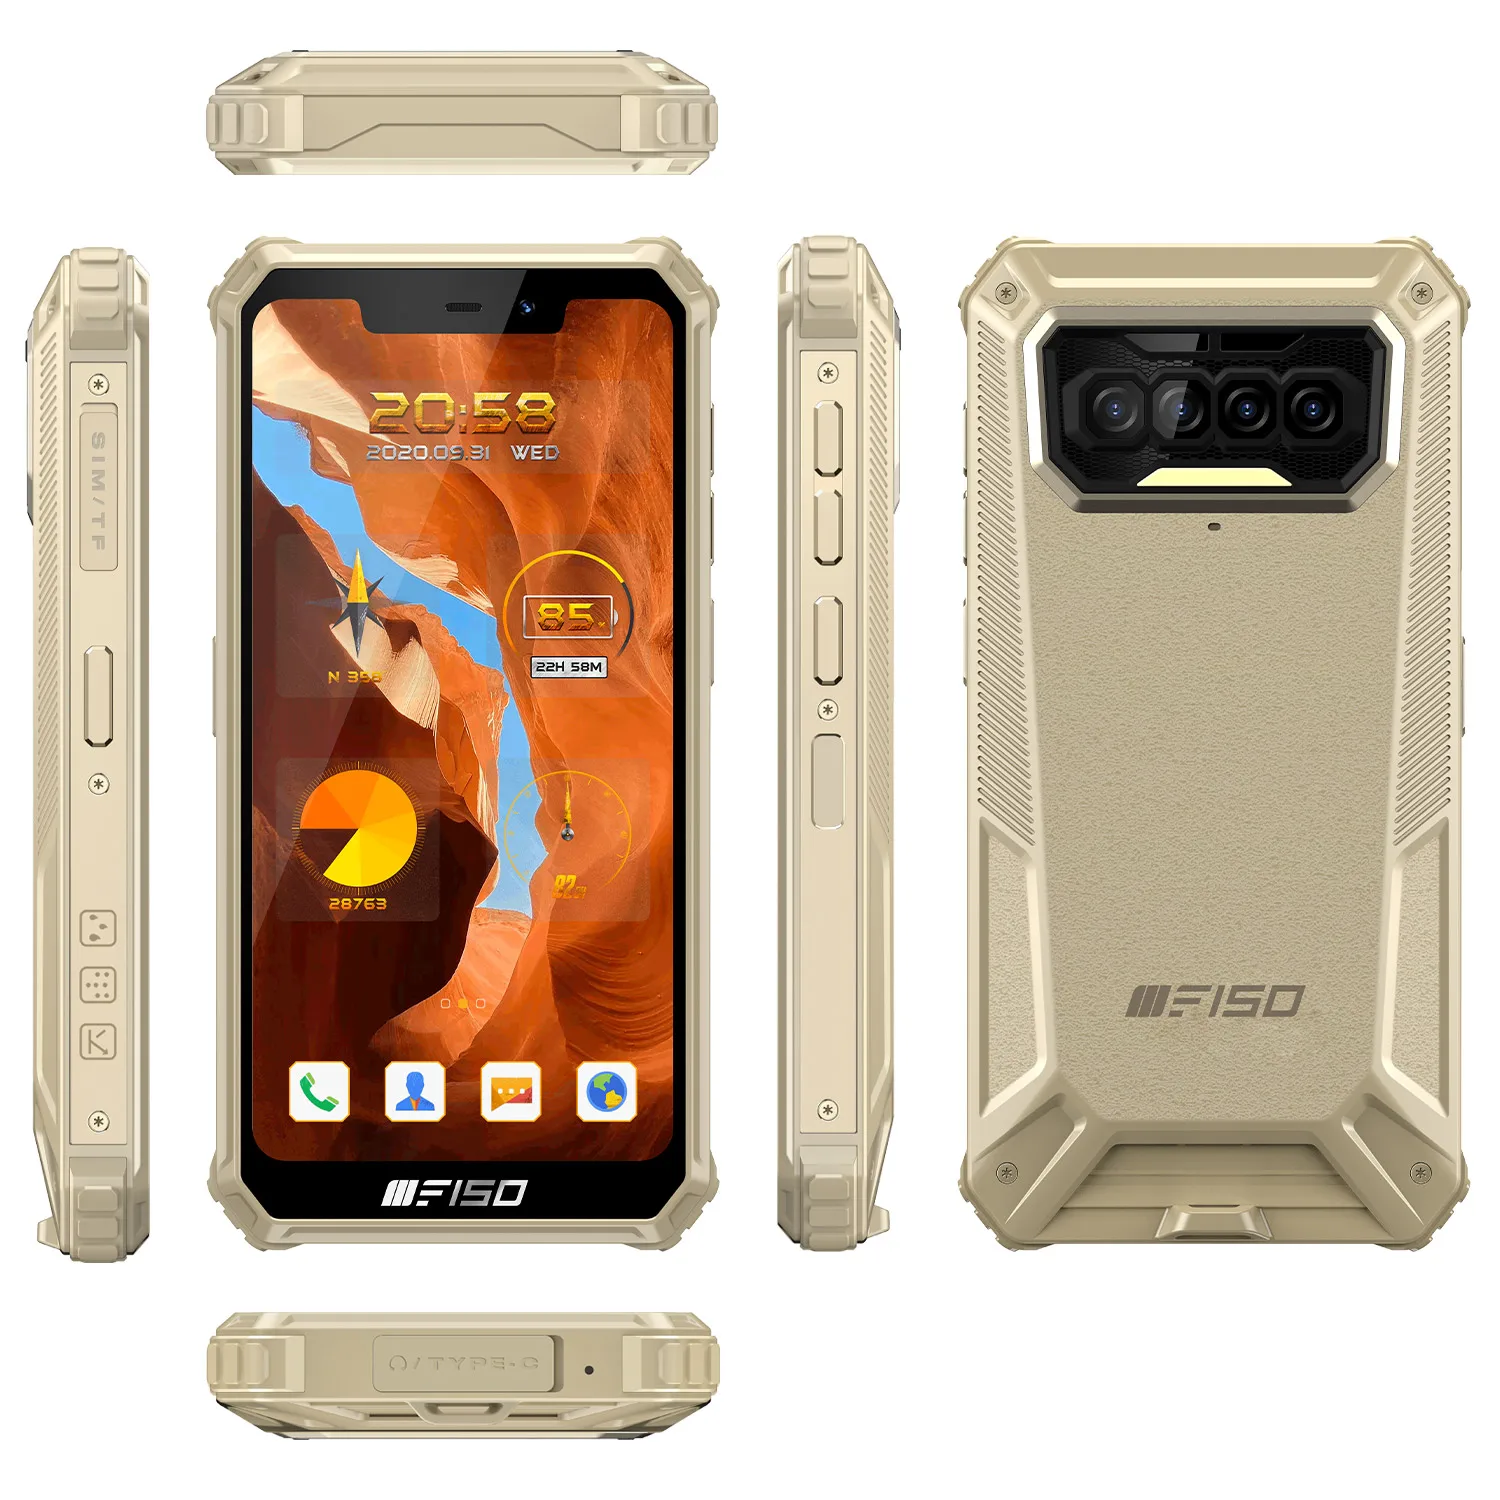 

New rugged F150 B2021 IP68/69K 5.86inches 13MP Camera Smartphone 6GB+64GB 8000mAh Octa Core Mobile Phone NFC Rugged Cell Phone